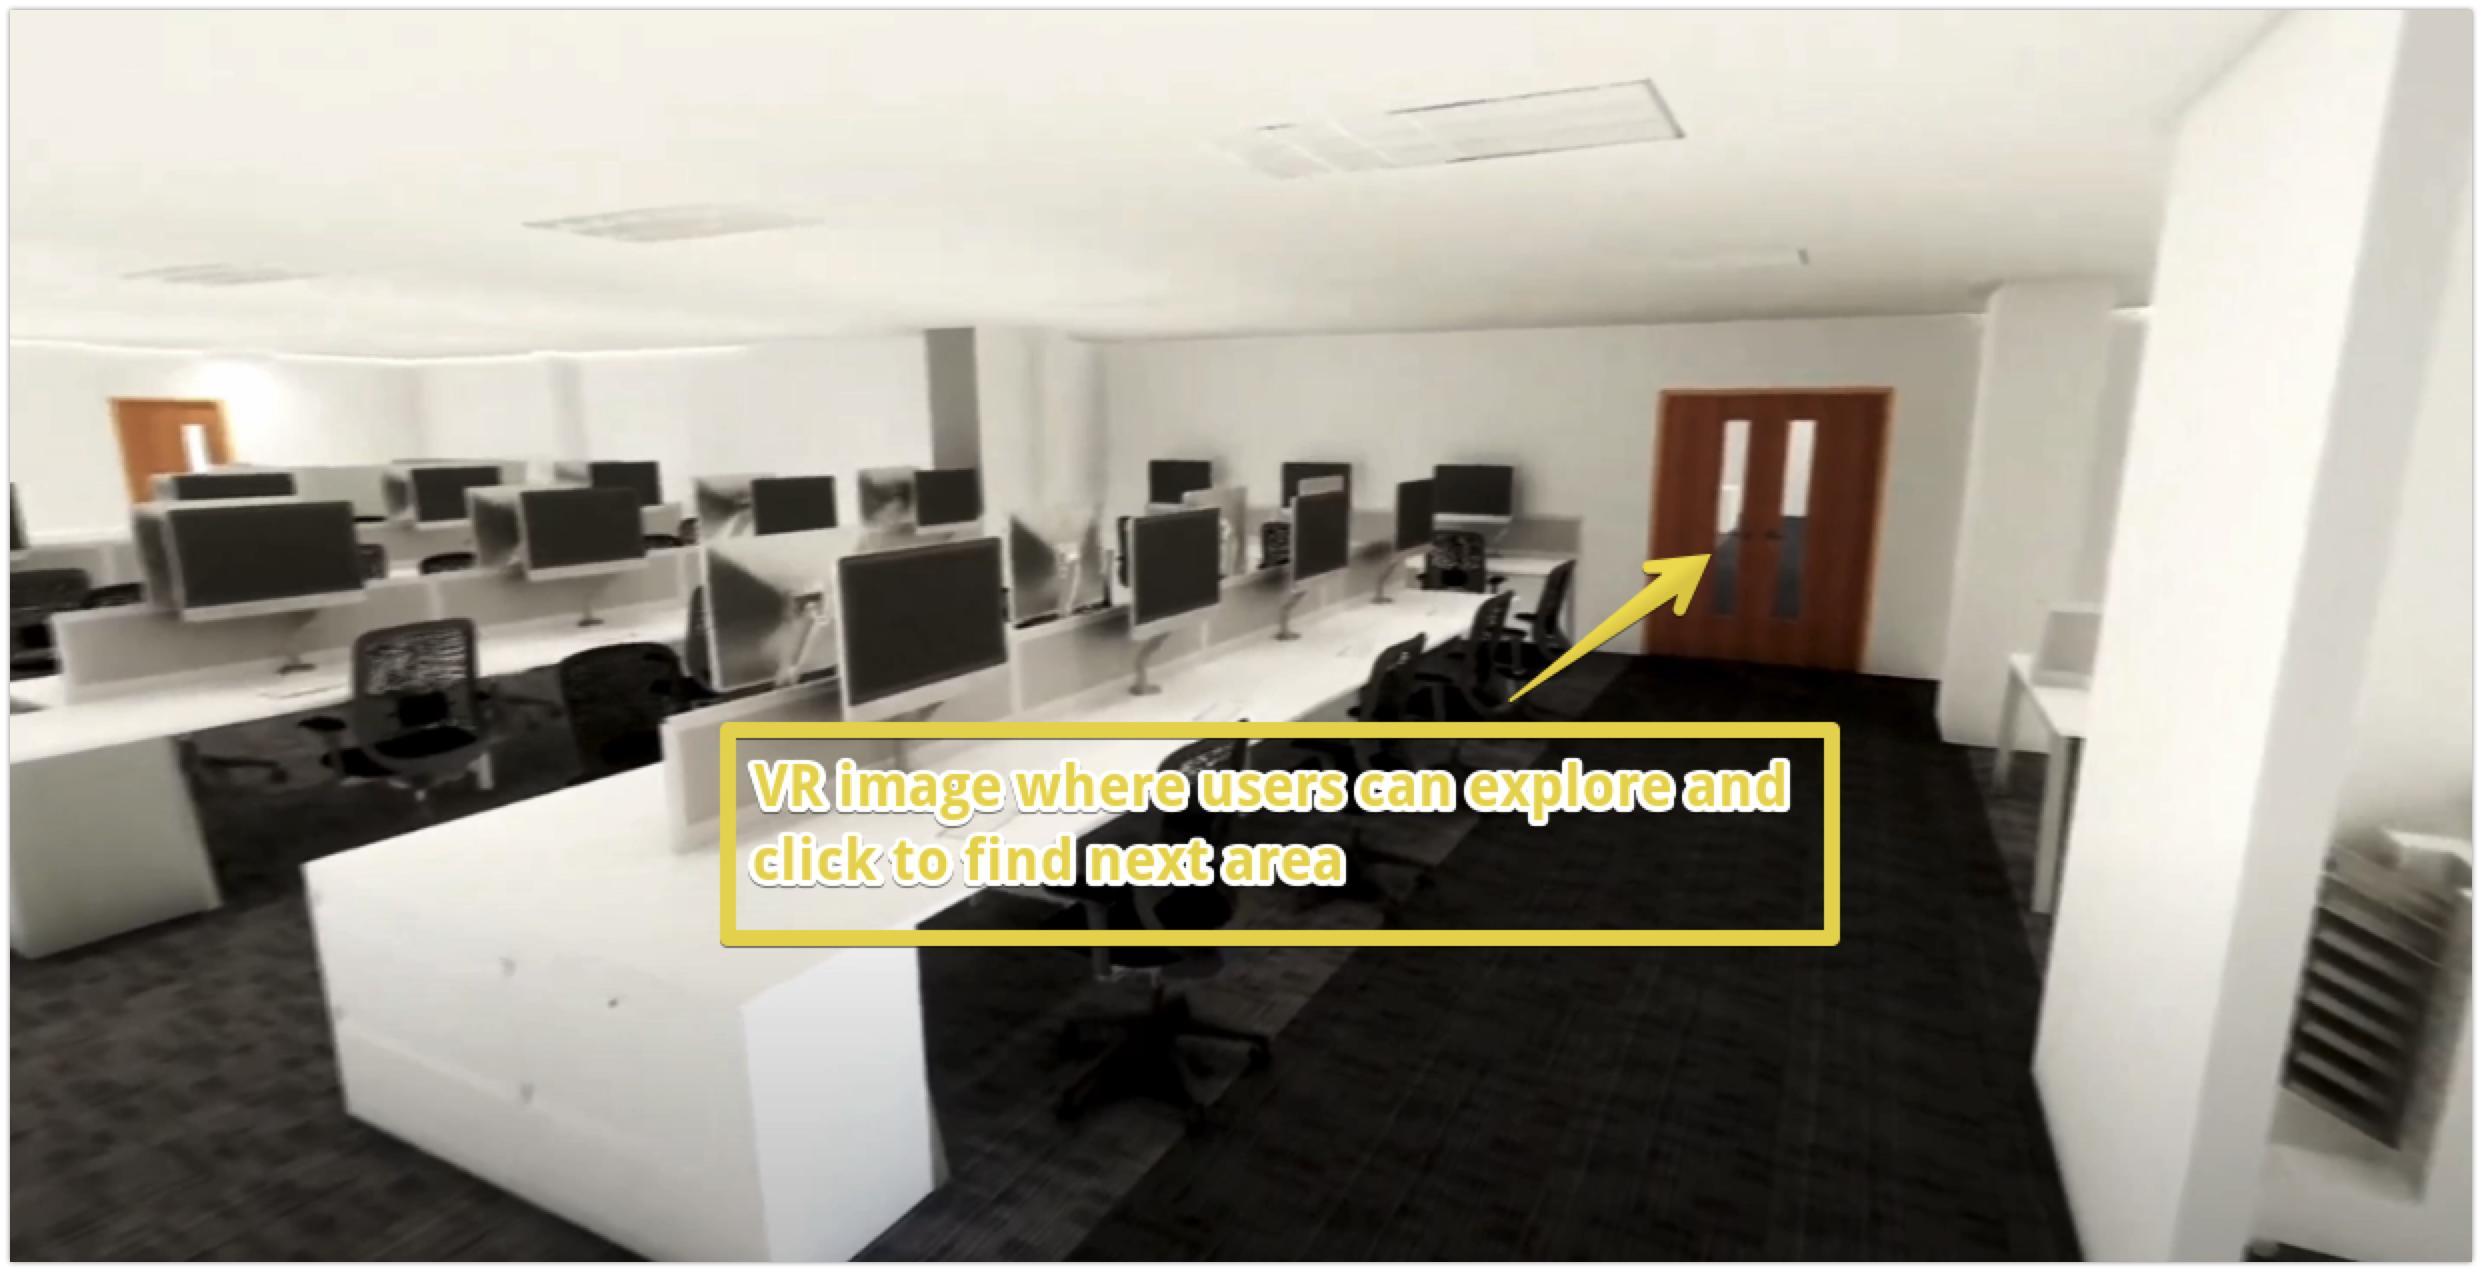 Load video: Mockup of the VR office section moving into the Meeting room chapter of the e-learning, with a knowledge check and certificate at the end